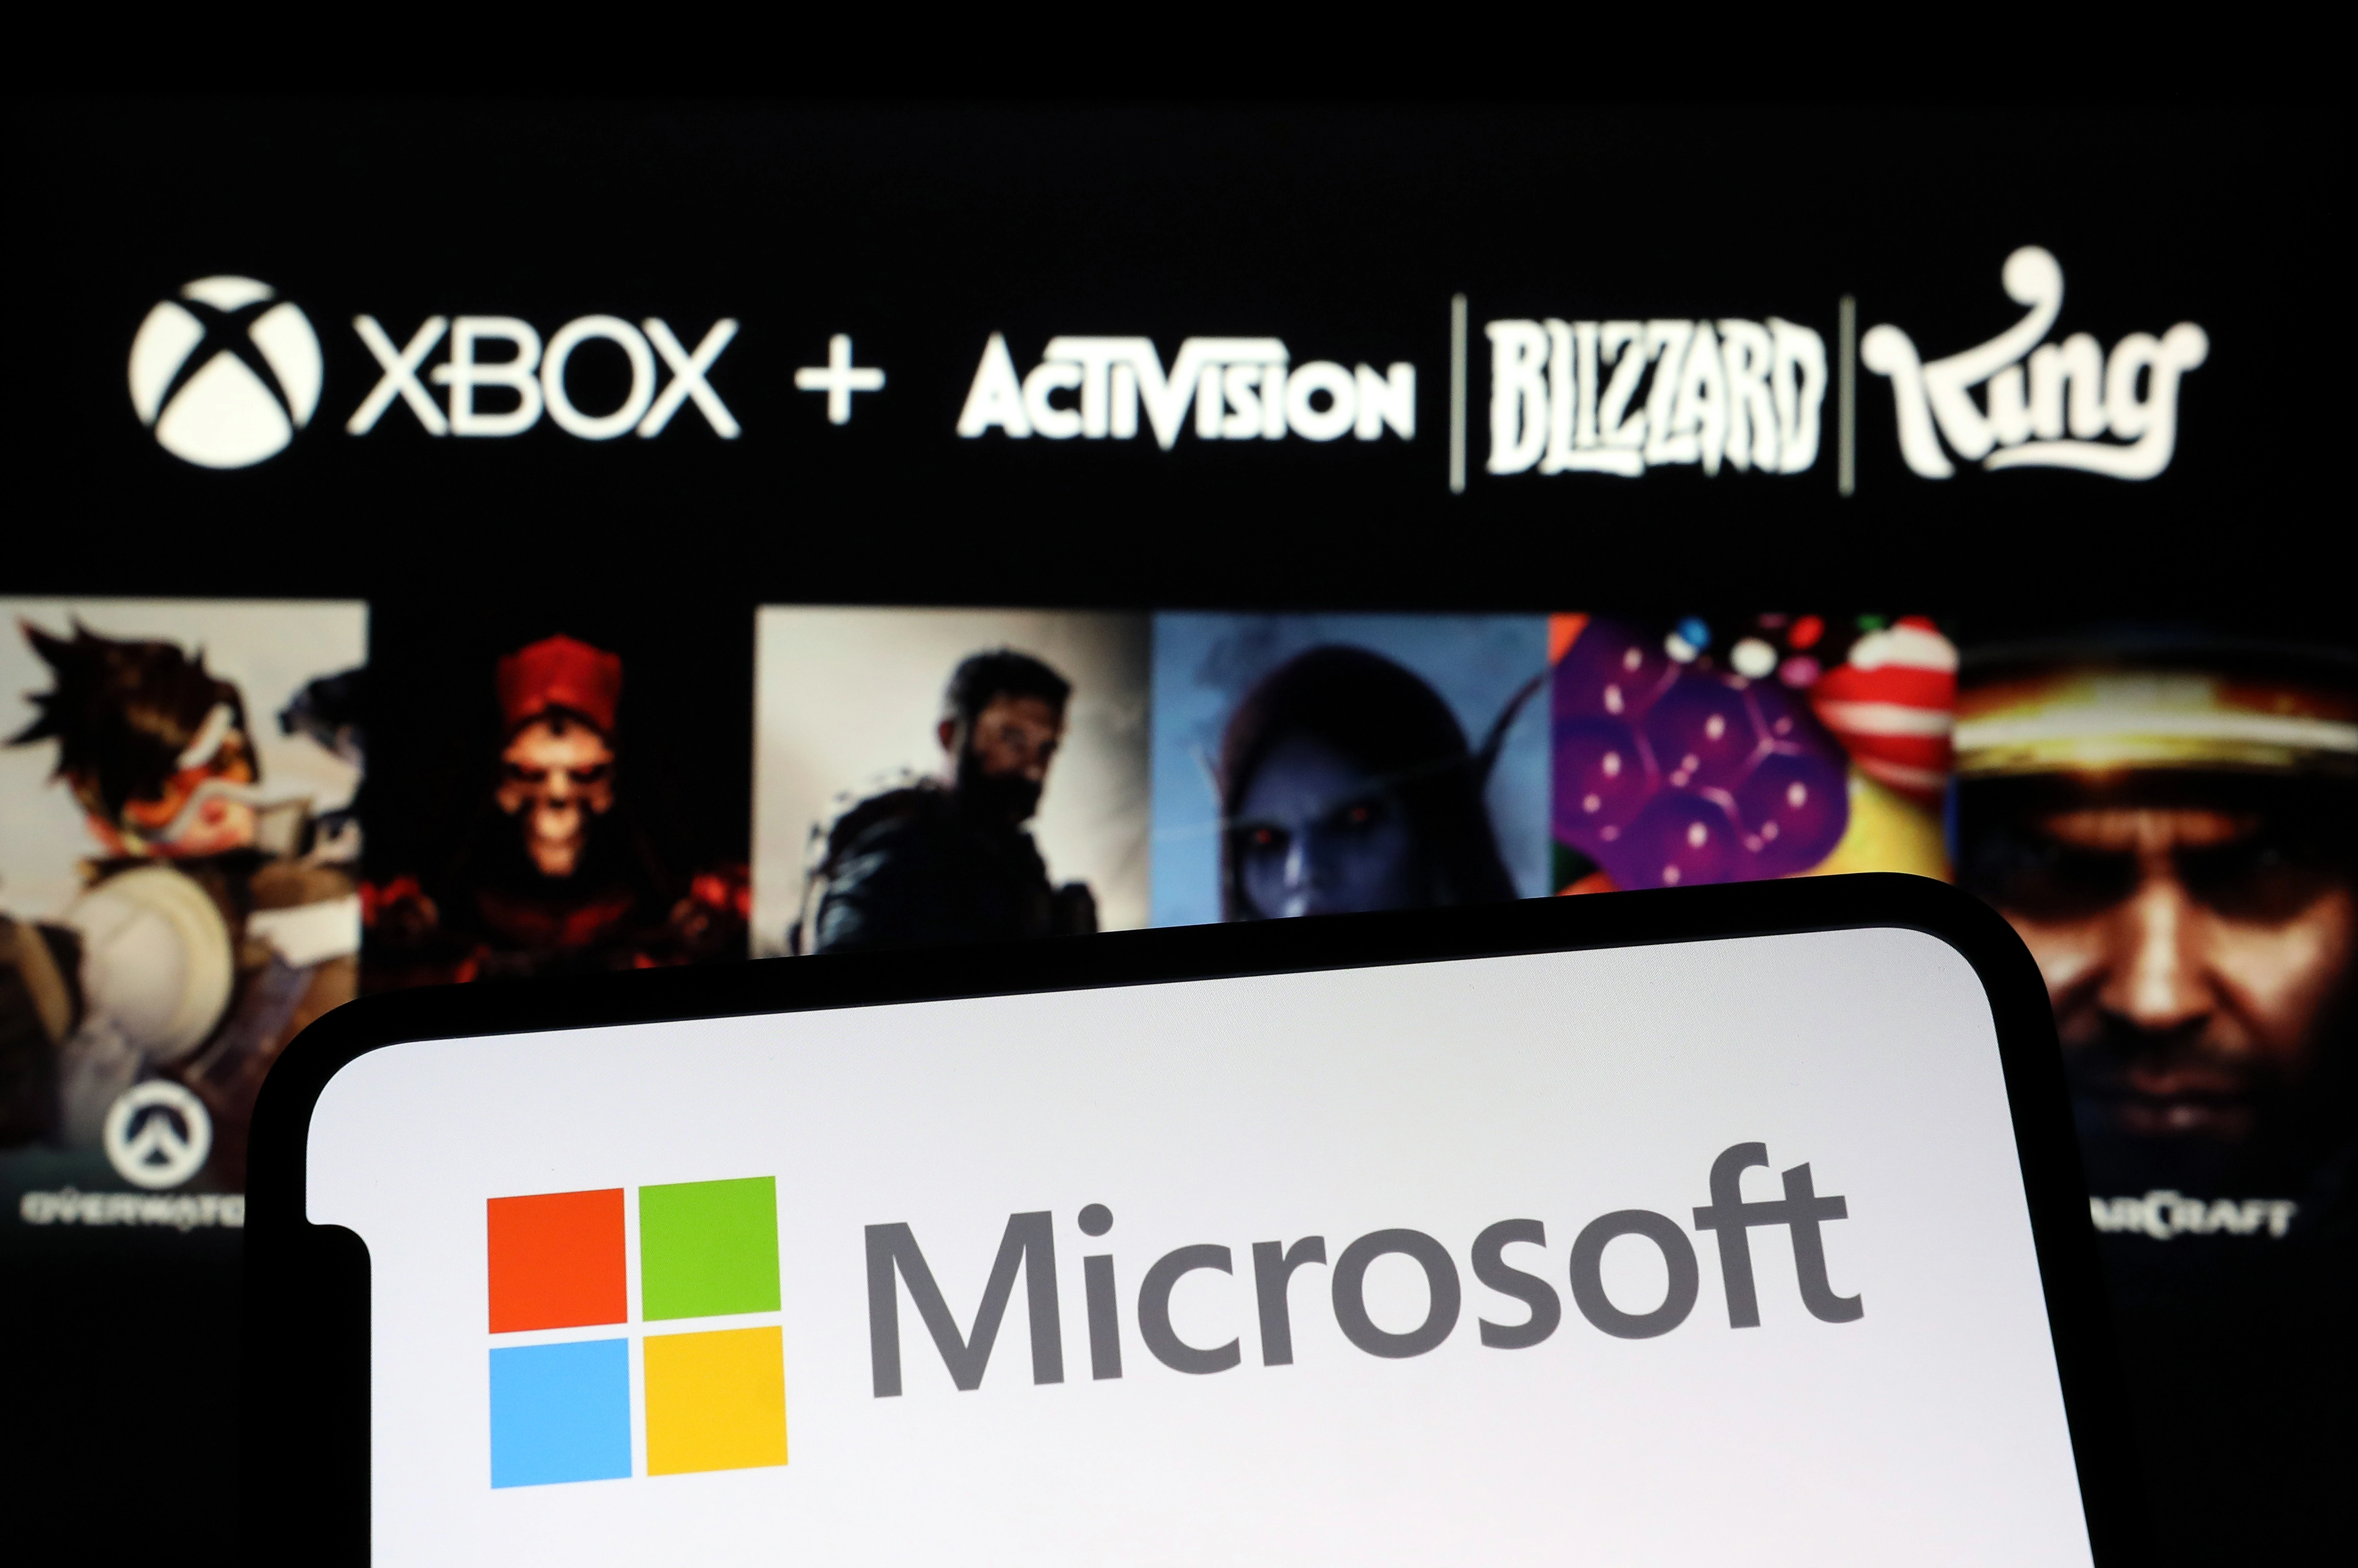 Microsoft Activision deal likely to be approved by EU regulators, Reuters reports